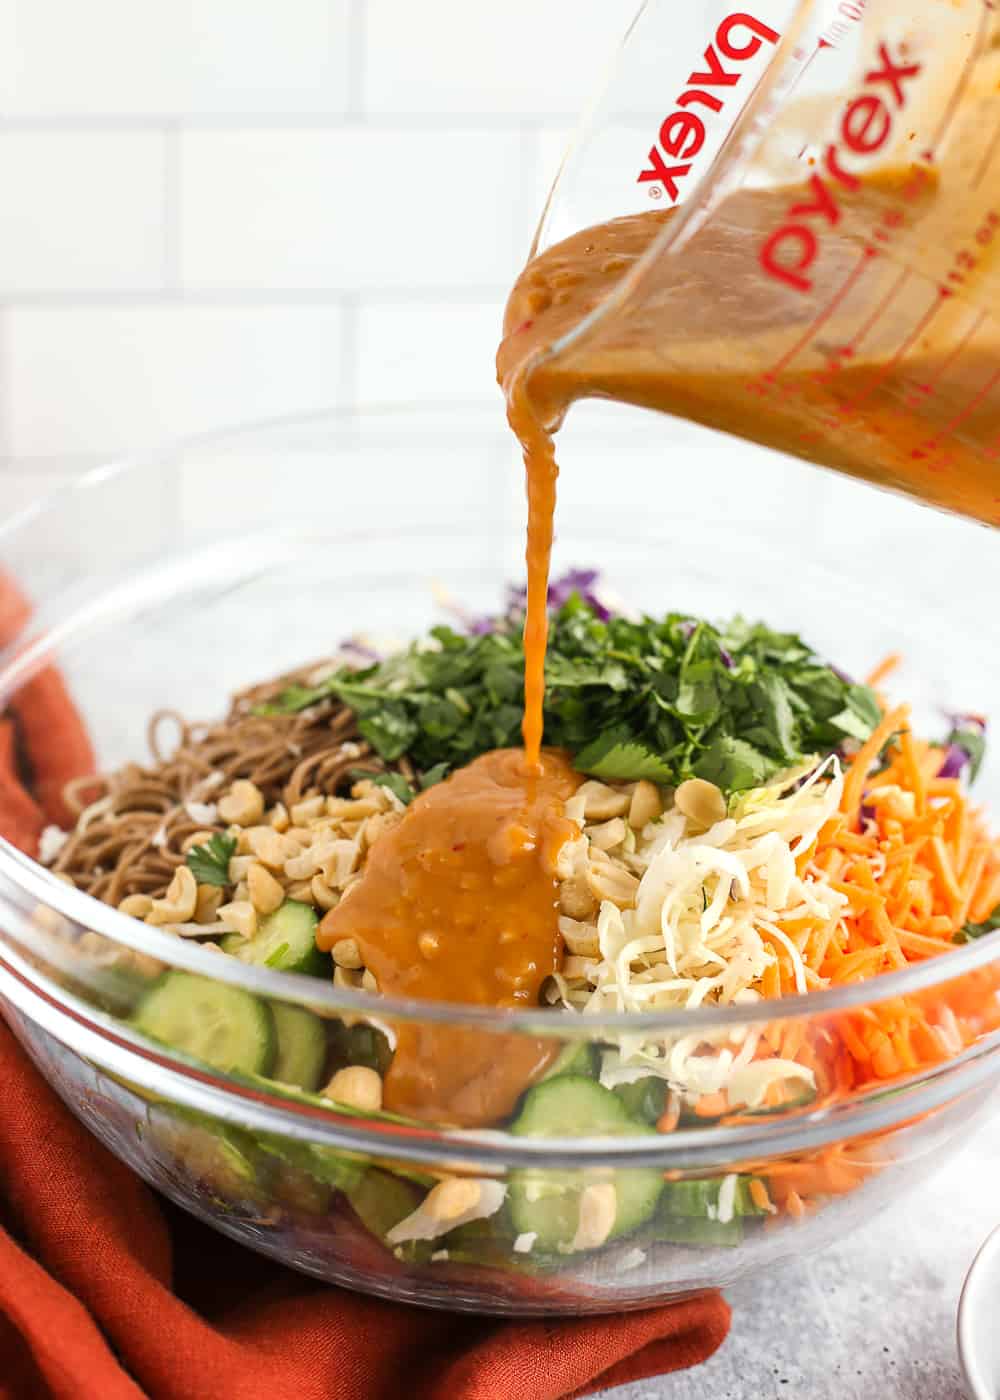 Creamy peanut sauce is poured from a clear glass measuring cup into a mixing bowl with soba noodles, sliced cucumbers, chopped cilantro, and shredded cabbage and carrots